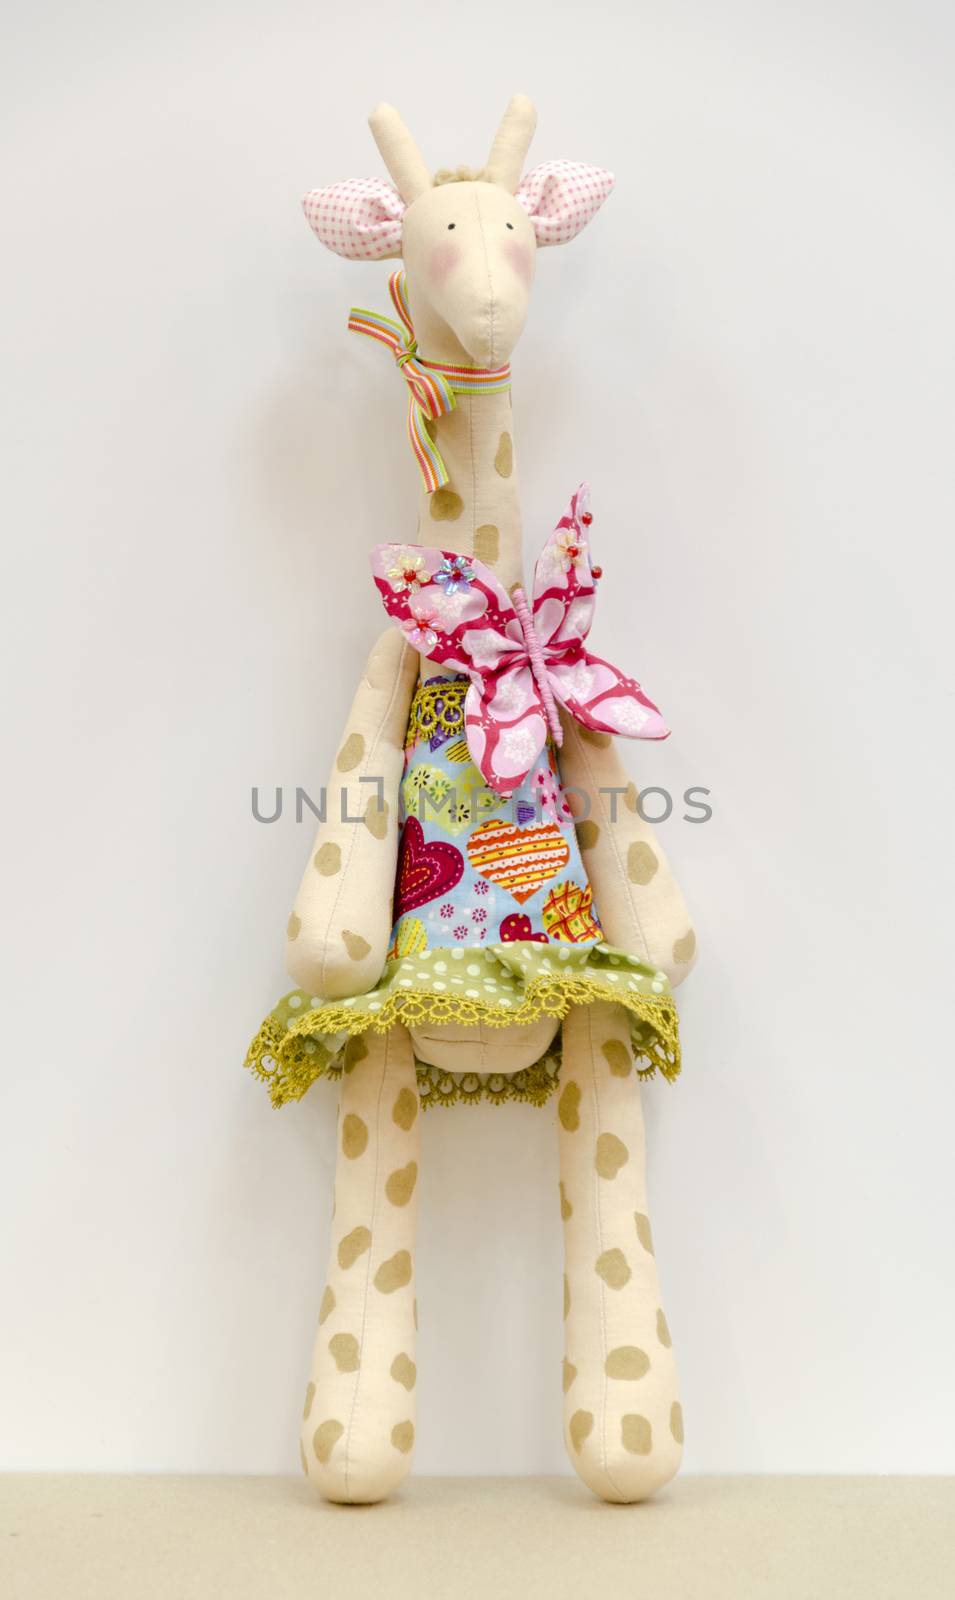 Hand made soft toy giraffe in a dress standing by pt-home